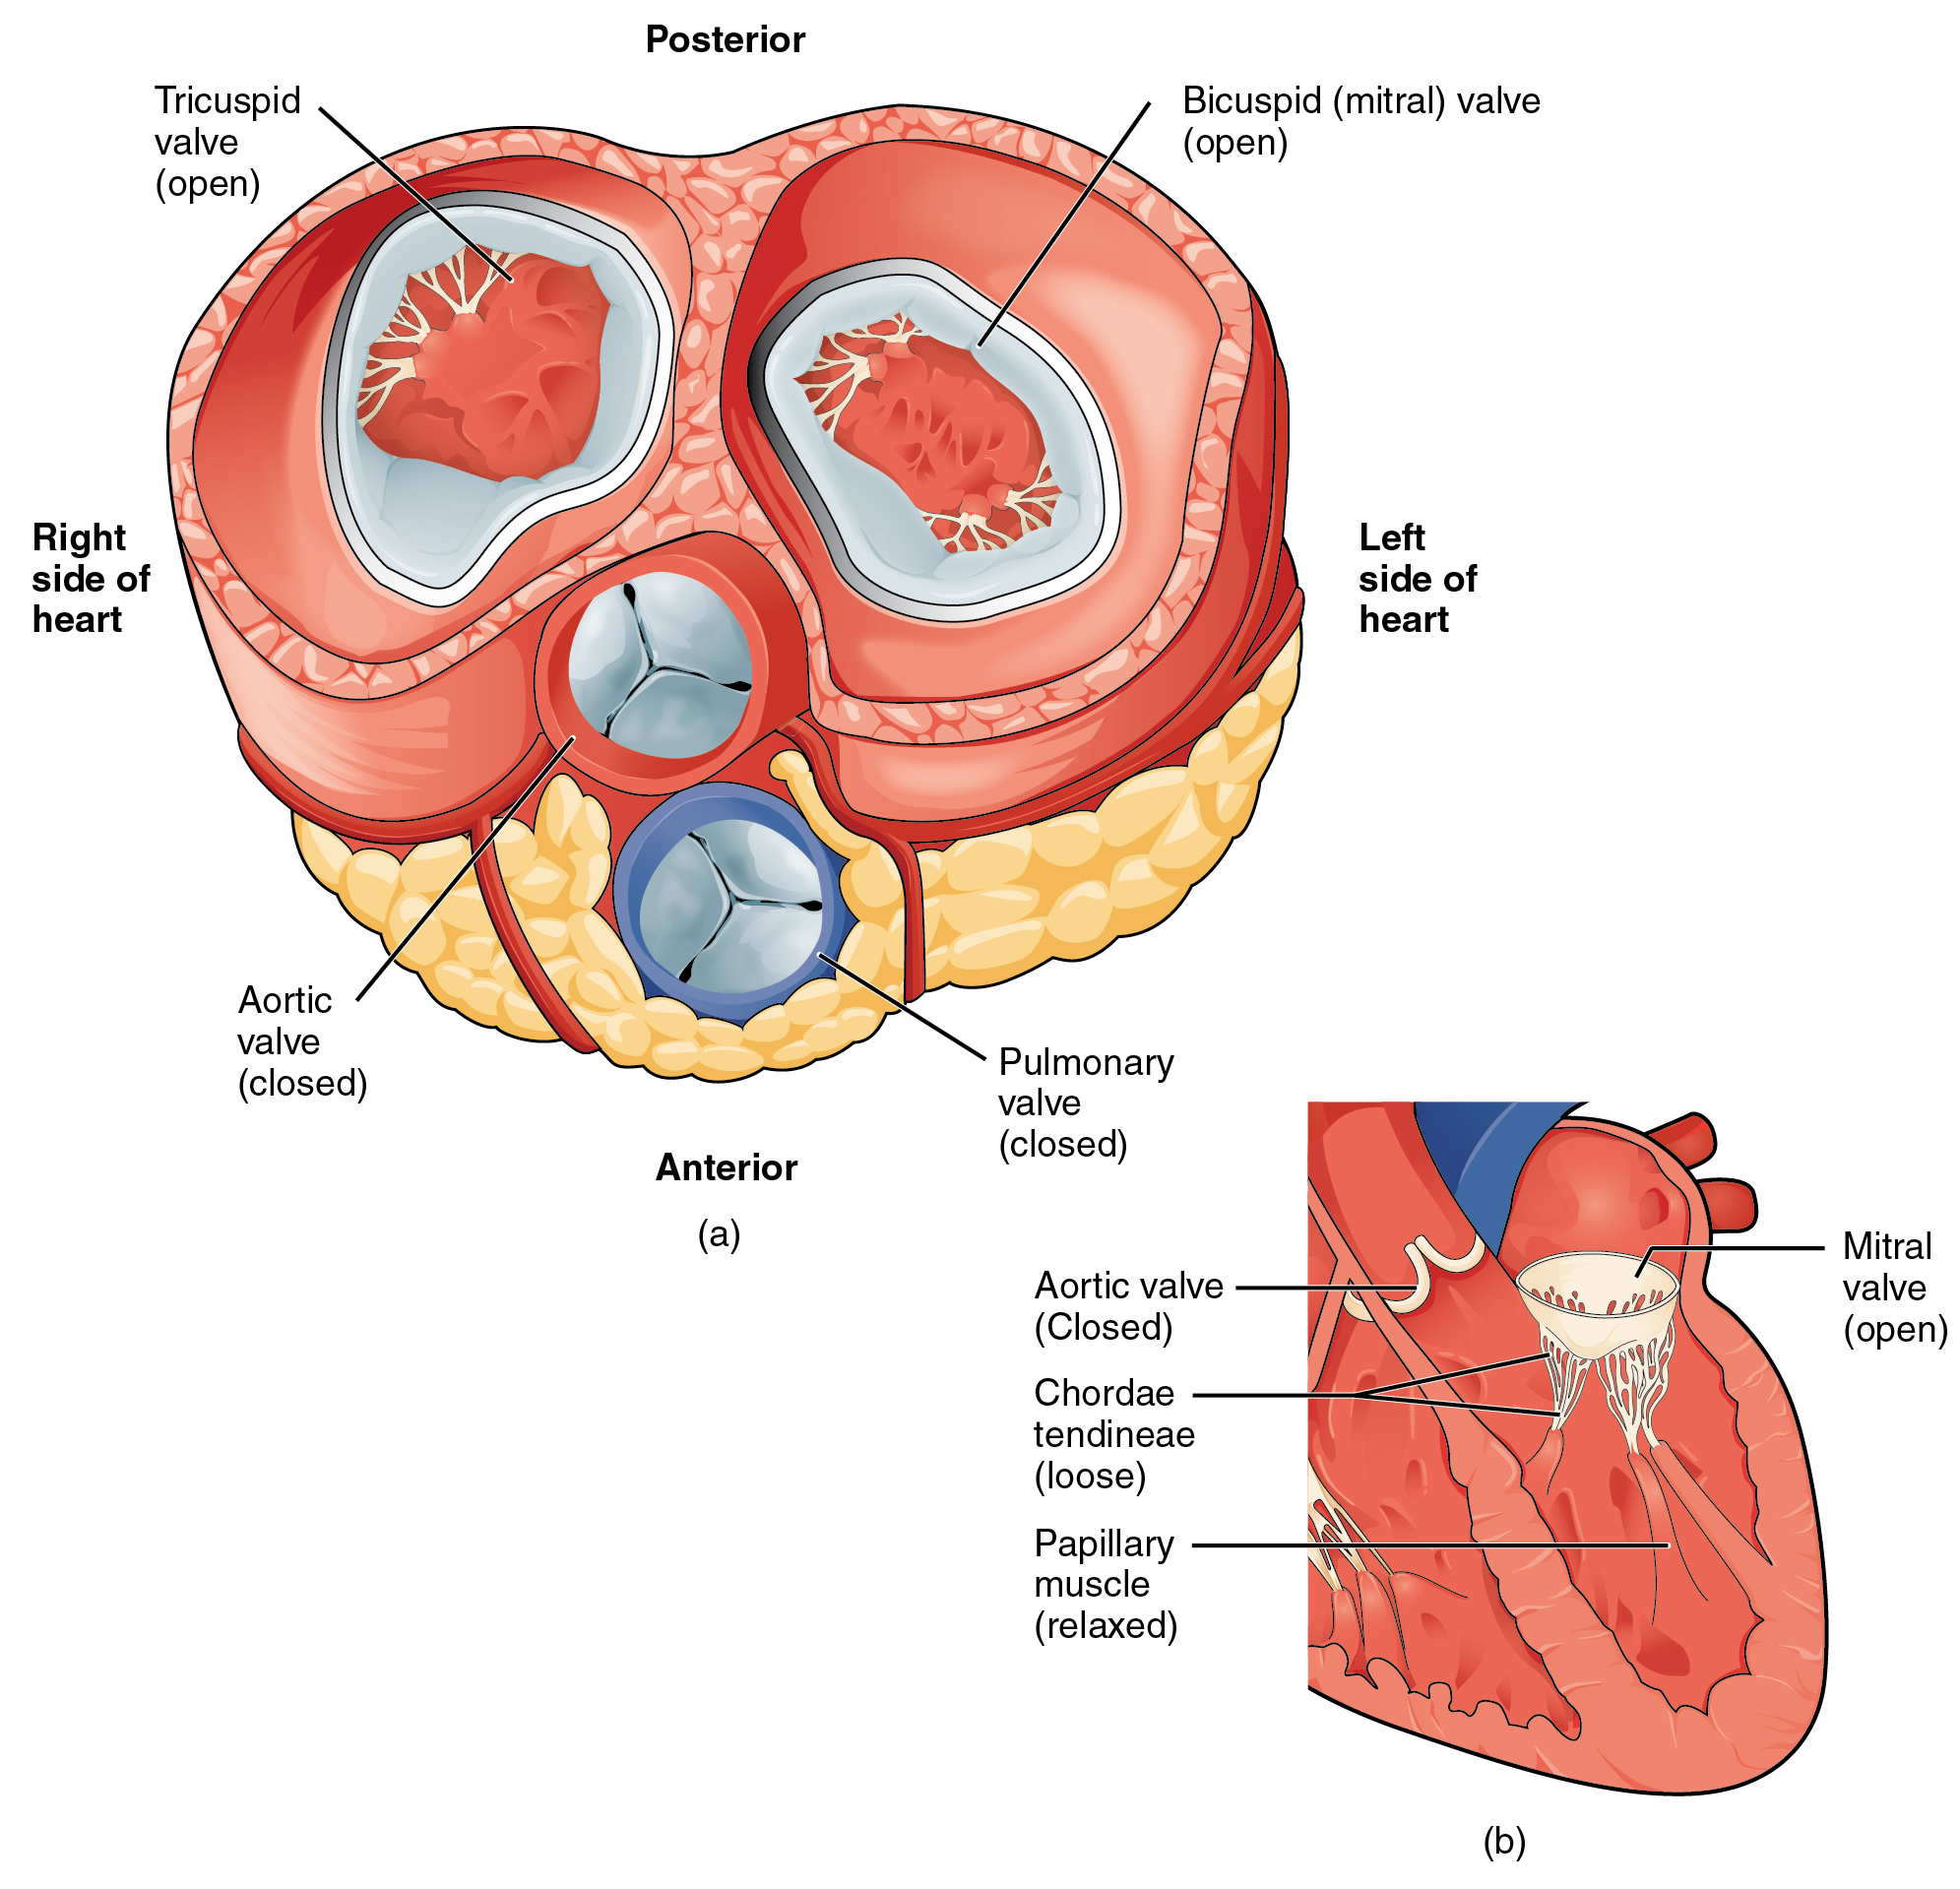 The left panel of this figure shows the anterior view of the heart with the different valves, and the right panel of this figure shows the location of the mitral valve in the open position in the heart.